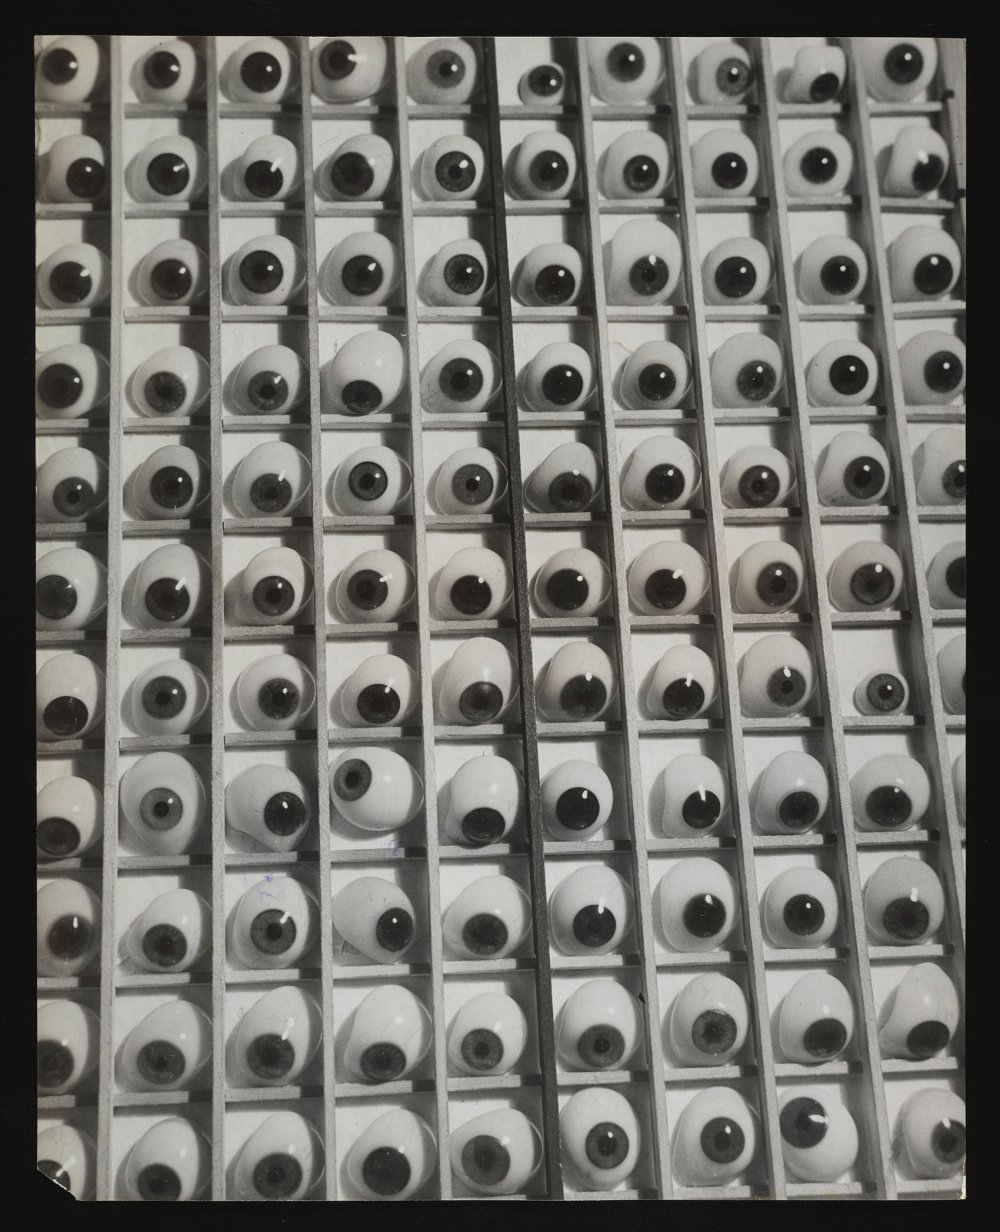 Rows of glass eyes in a box